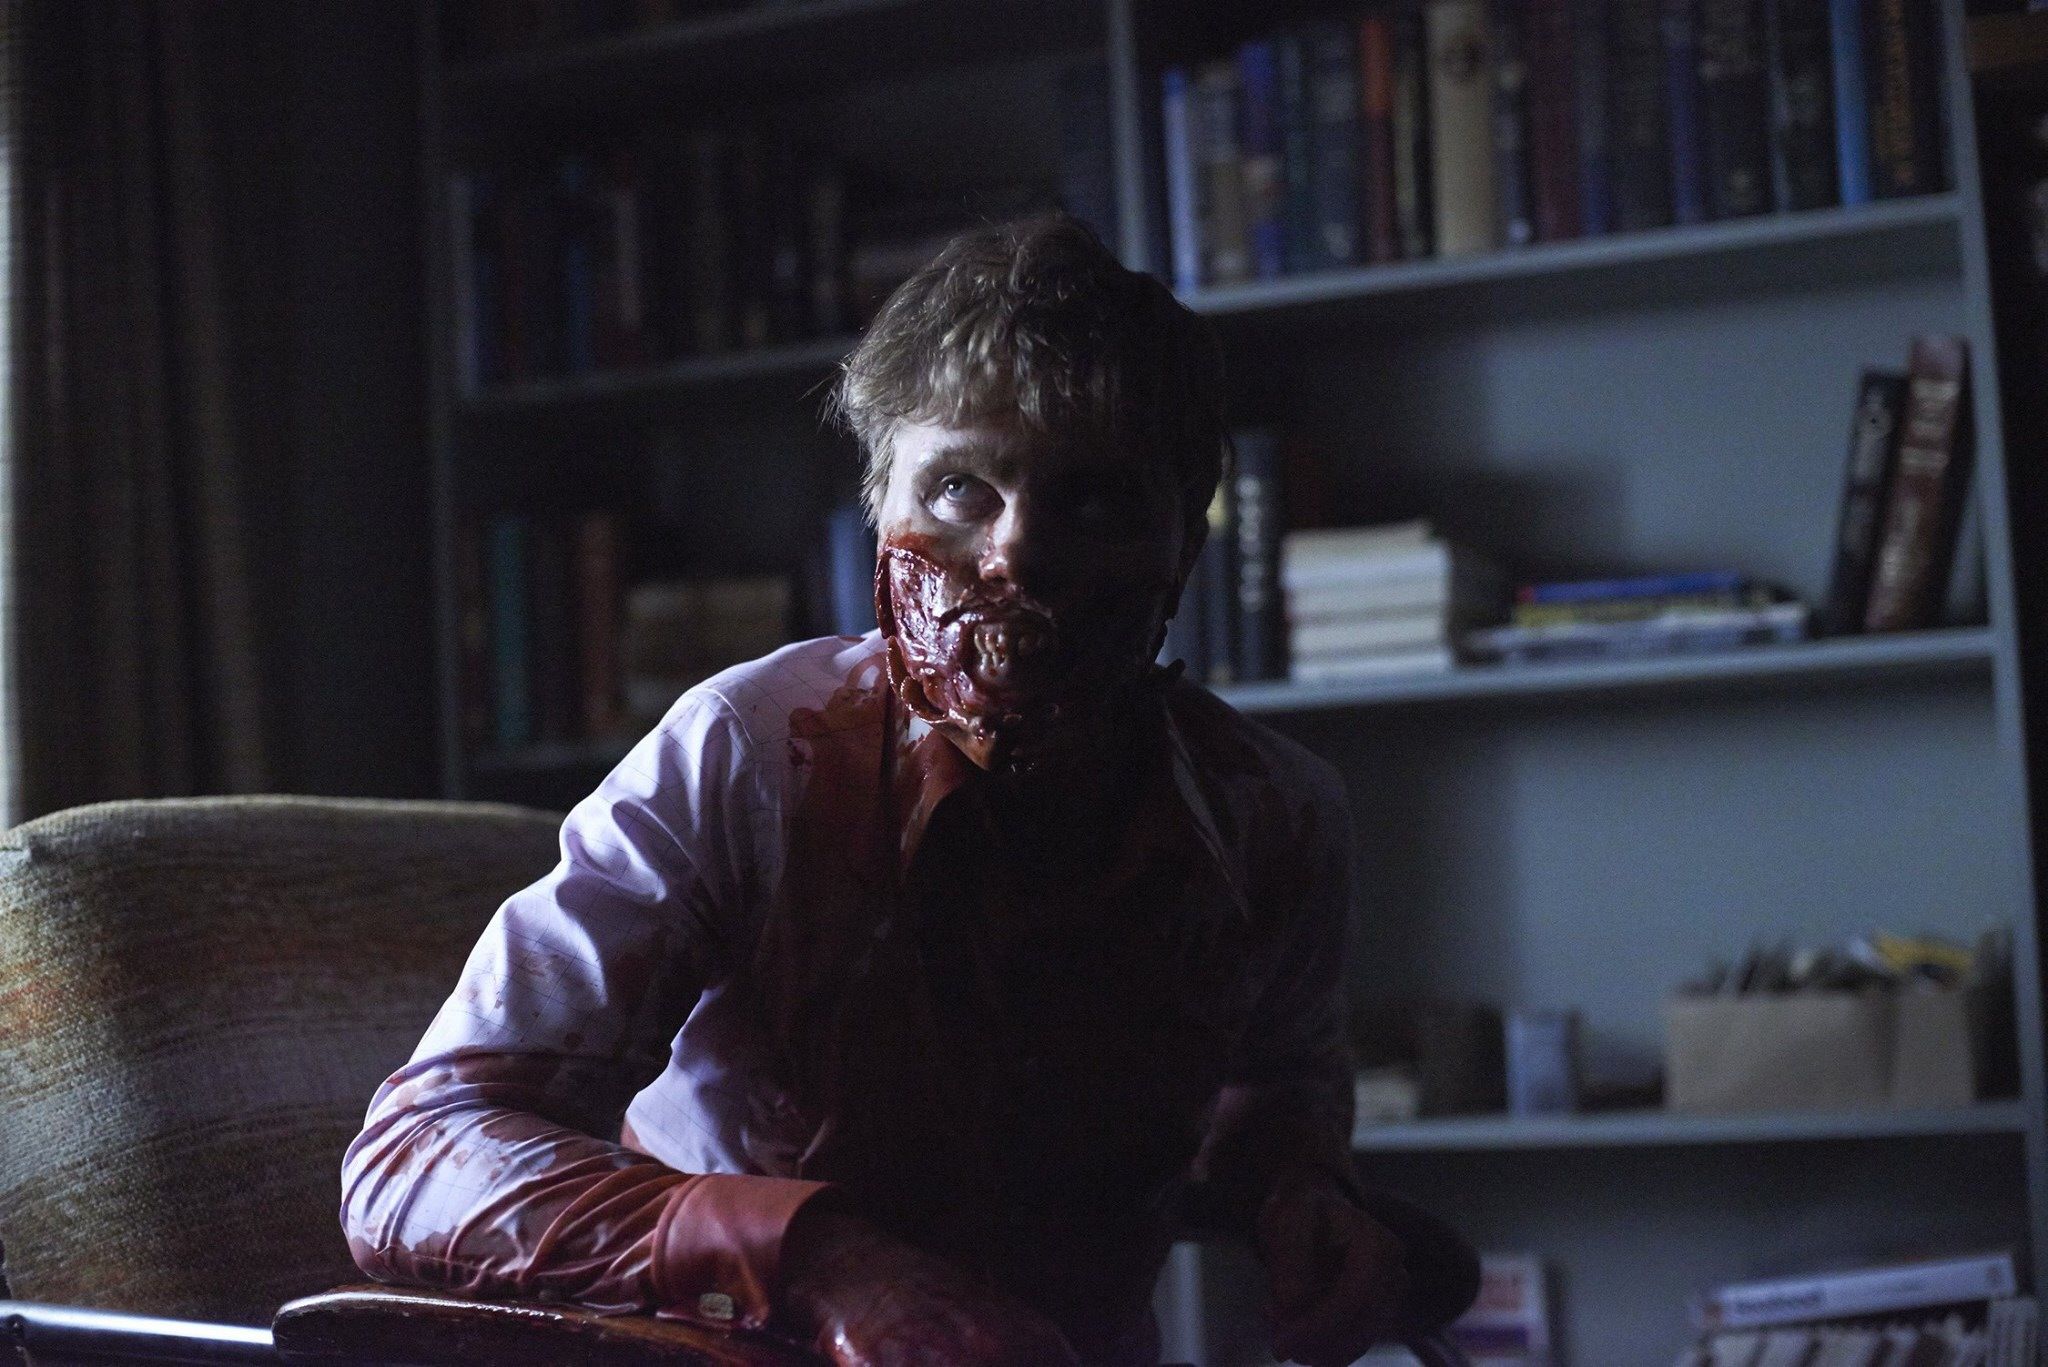 disturbing scenes from TV  - Hannibal… scene where guy is cutting off chunks of his face